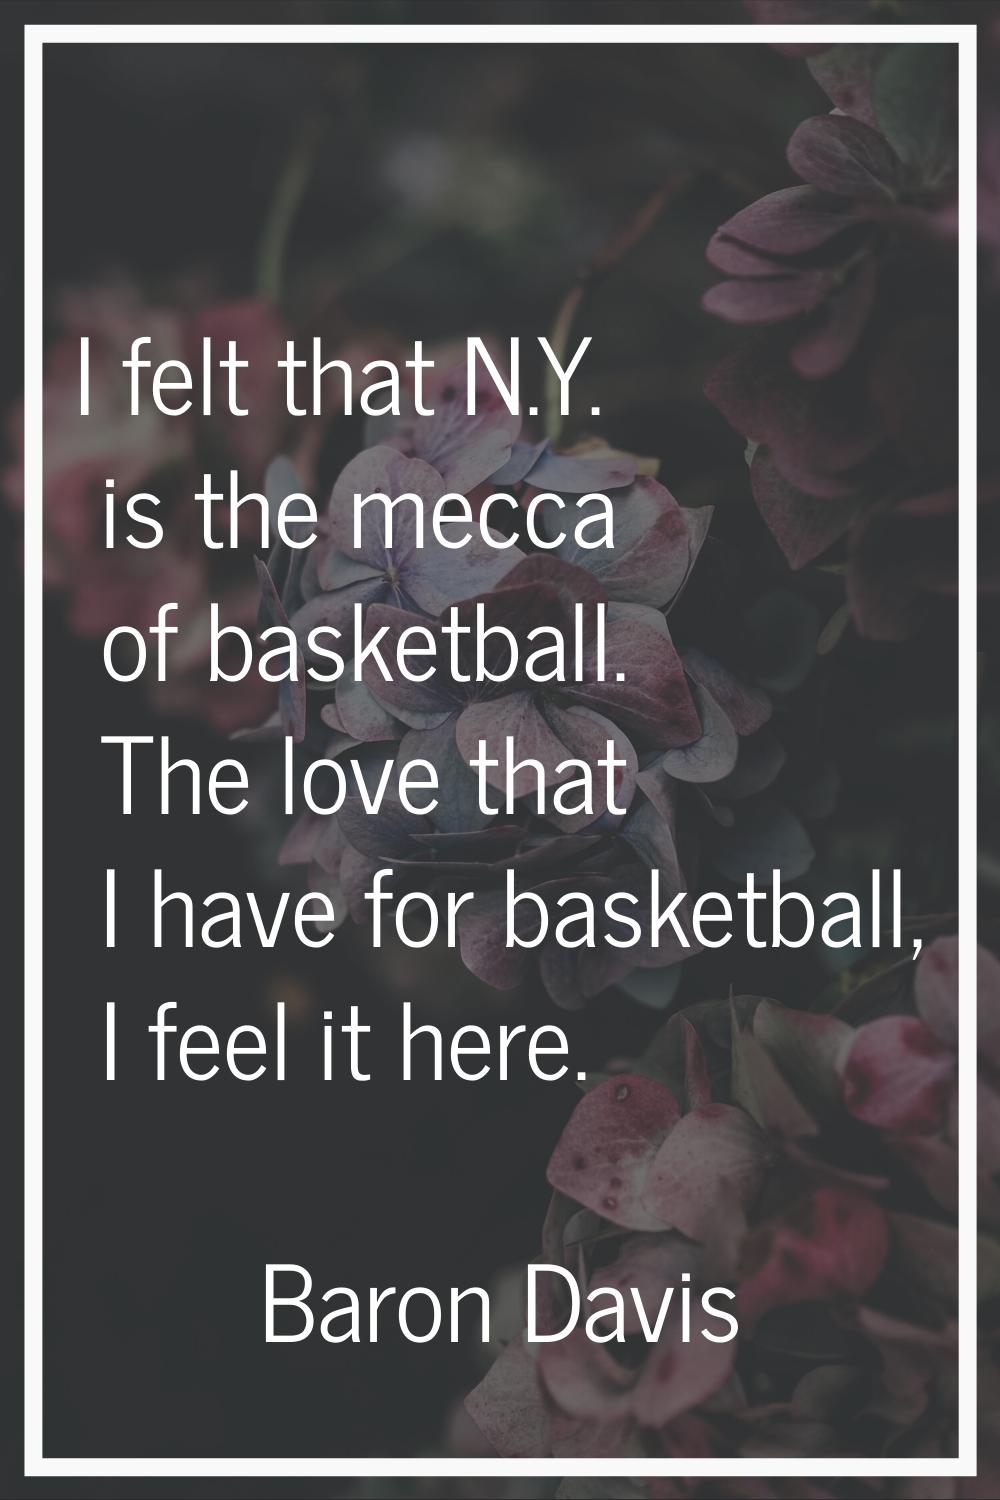 I felt that N.Y. is the mecca of basketball. The love that I have for basketball, I feel it here.